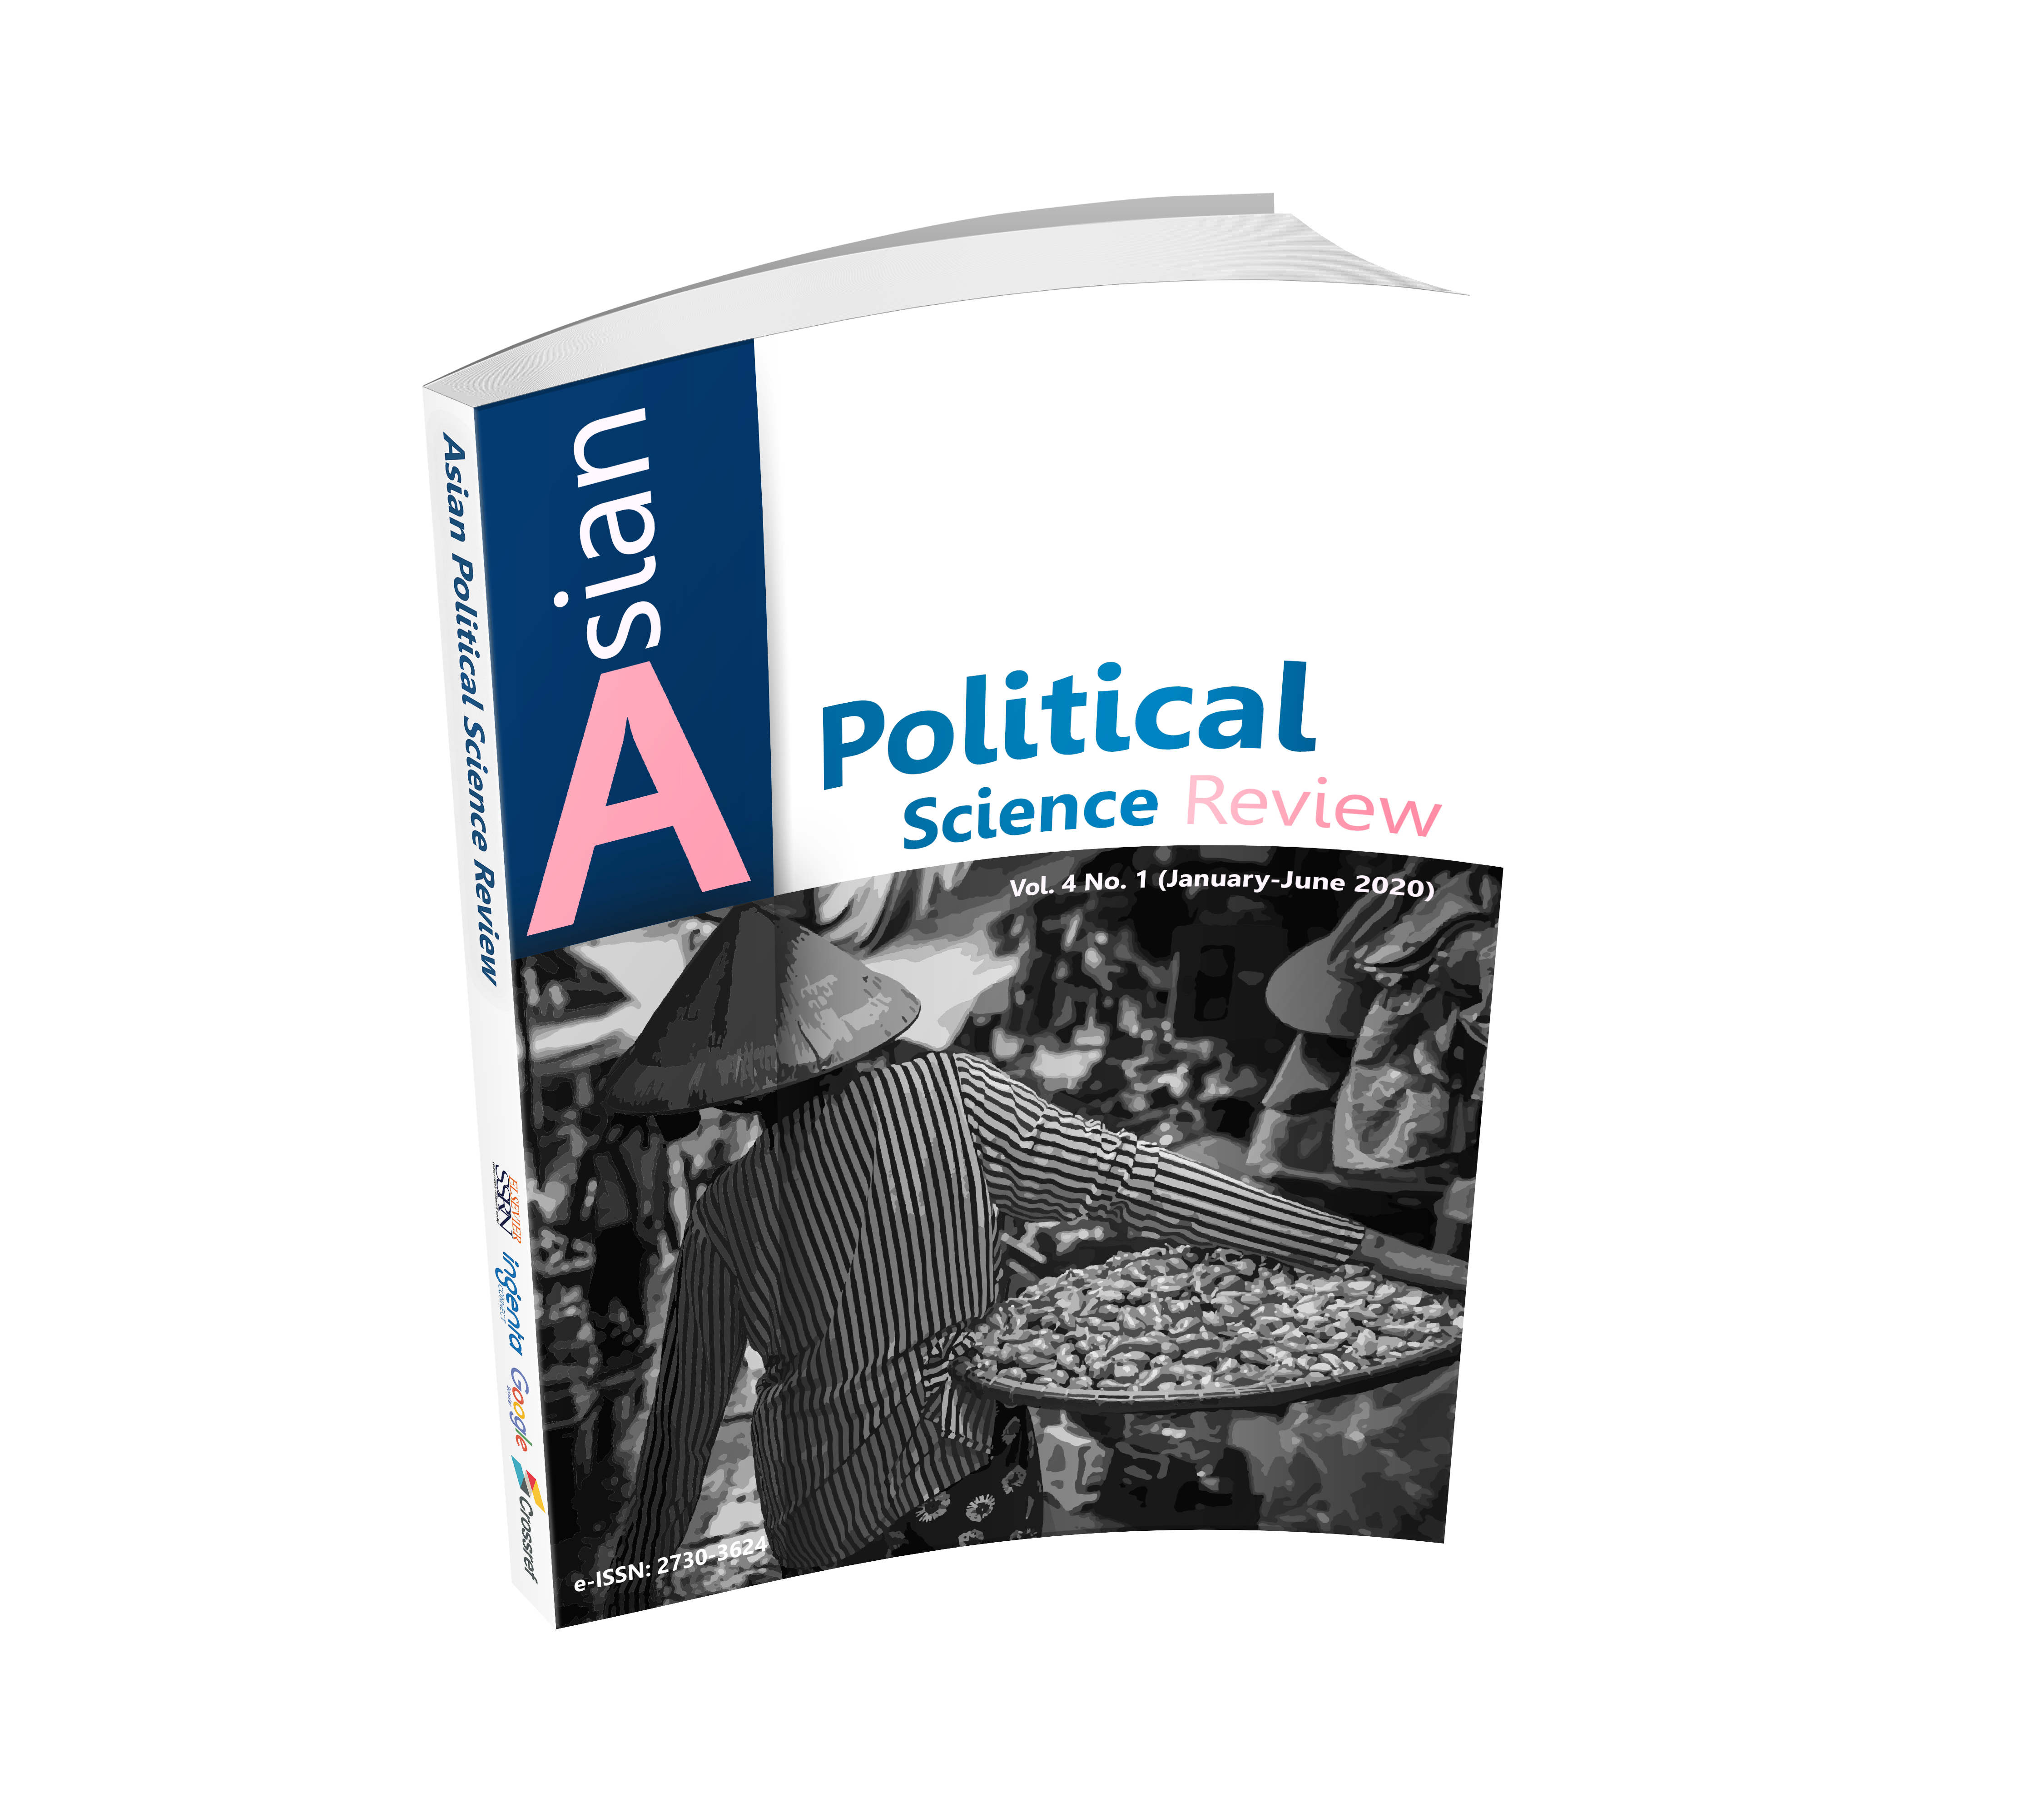 Asian political science